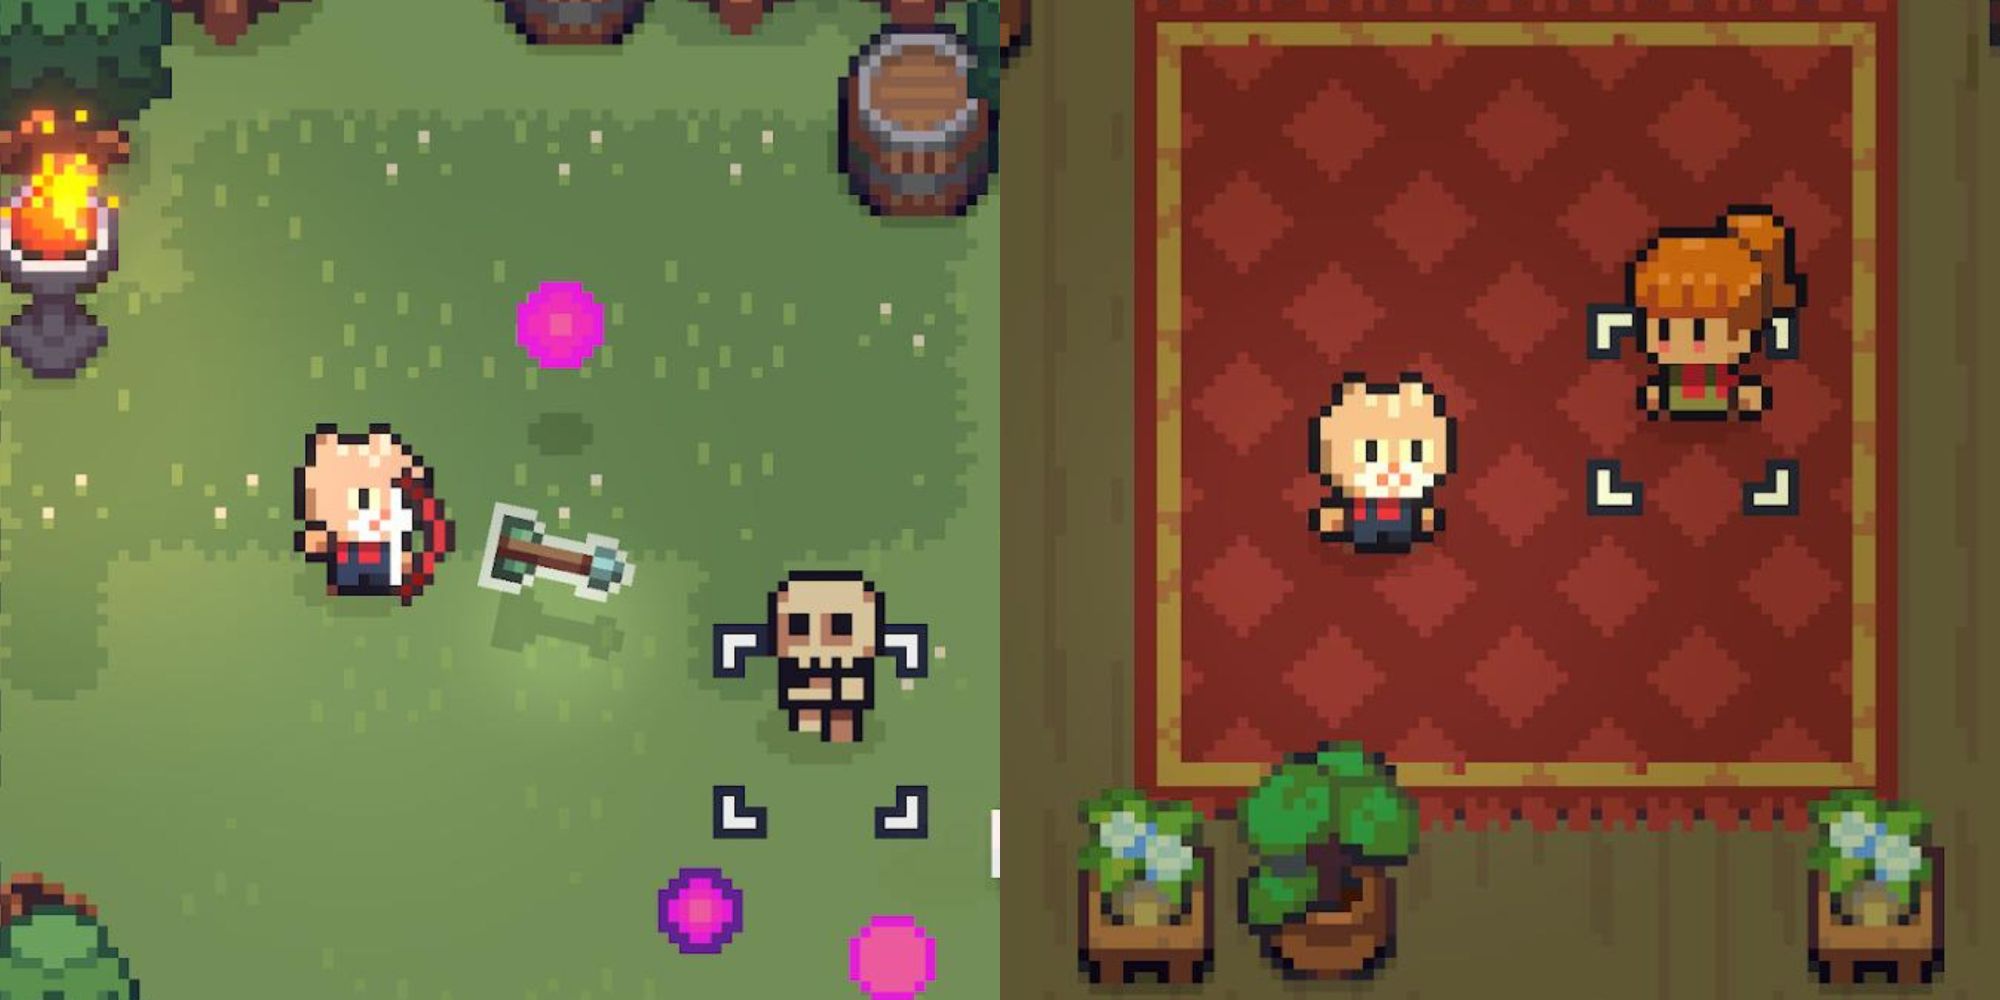 Cheese throwing an arrow to the skeleton soldier (left) and Cheese talking to a girl (right) (via The Way Home: Pixel Roguelike)